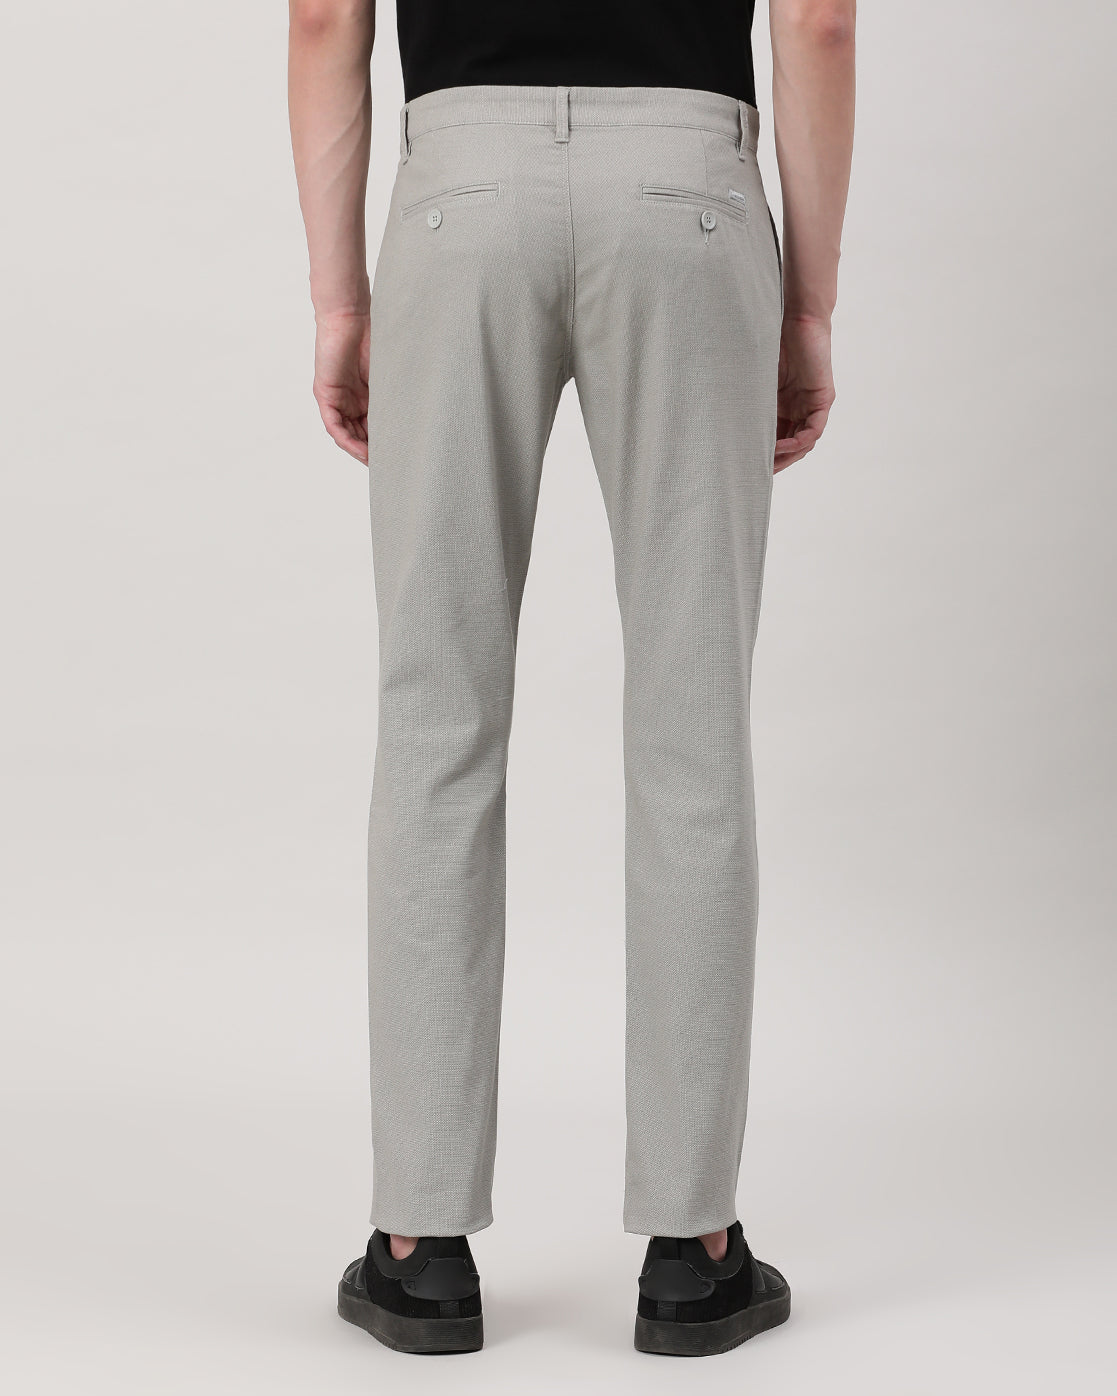 Casual Trim Fit Printed Silver Grey Trousers for Men